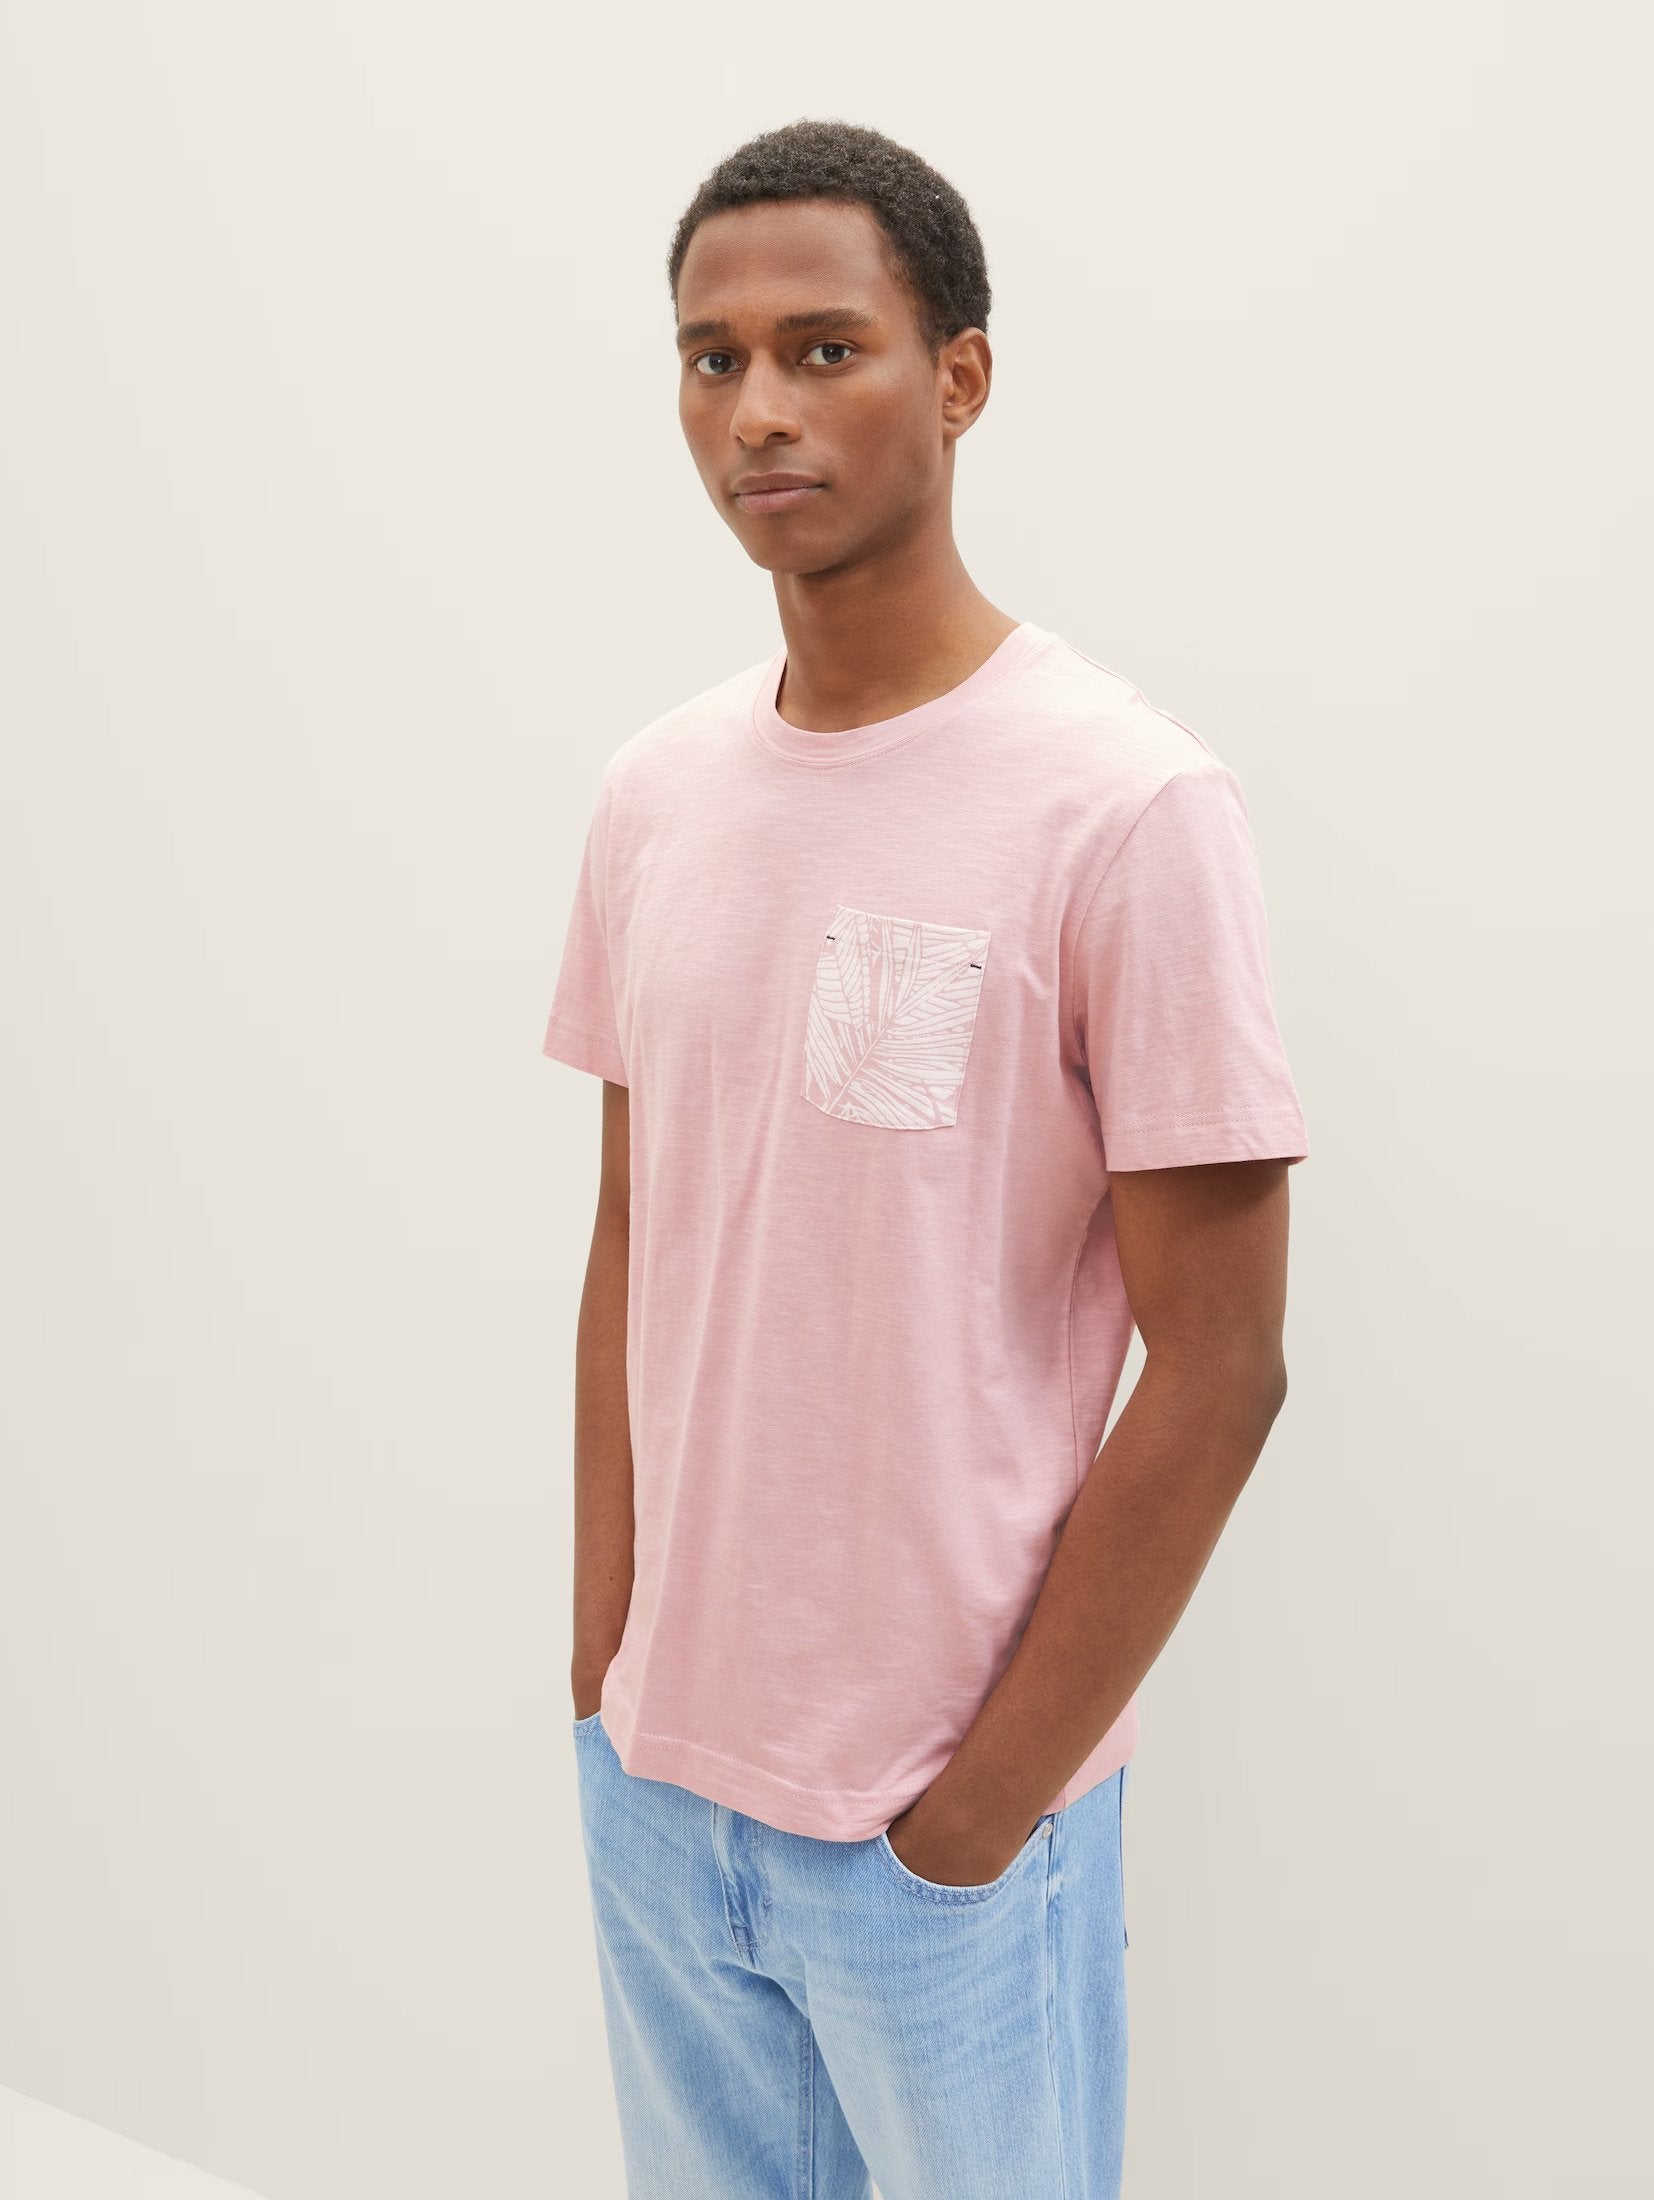 Tom Tailor Pink T-shirt With Chest Designed Pocket